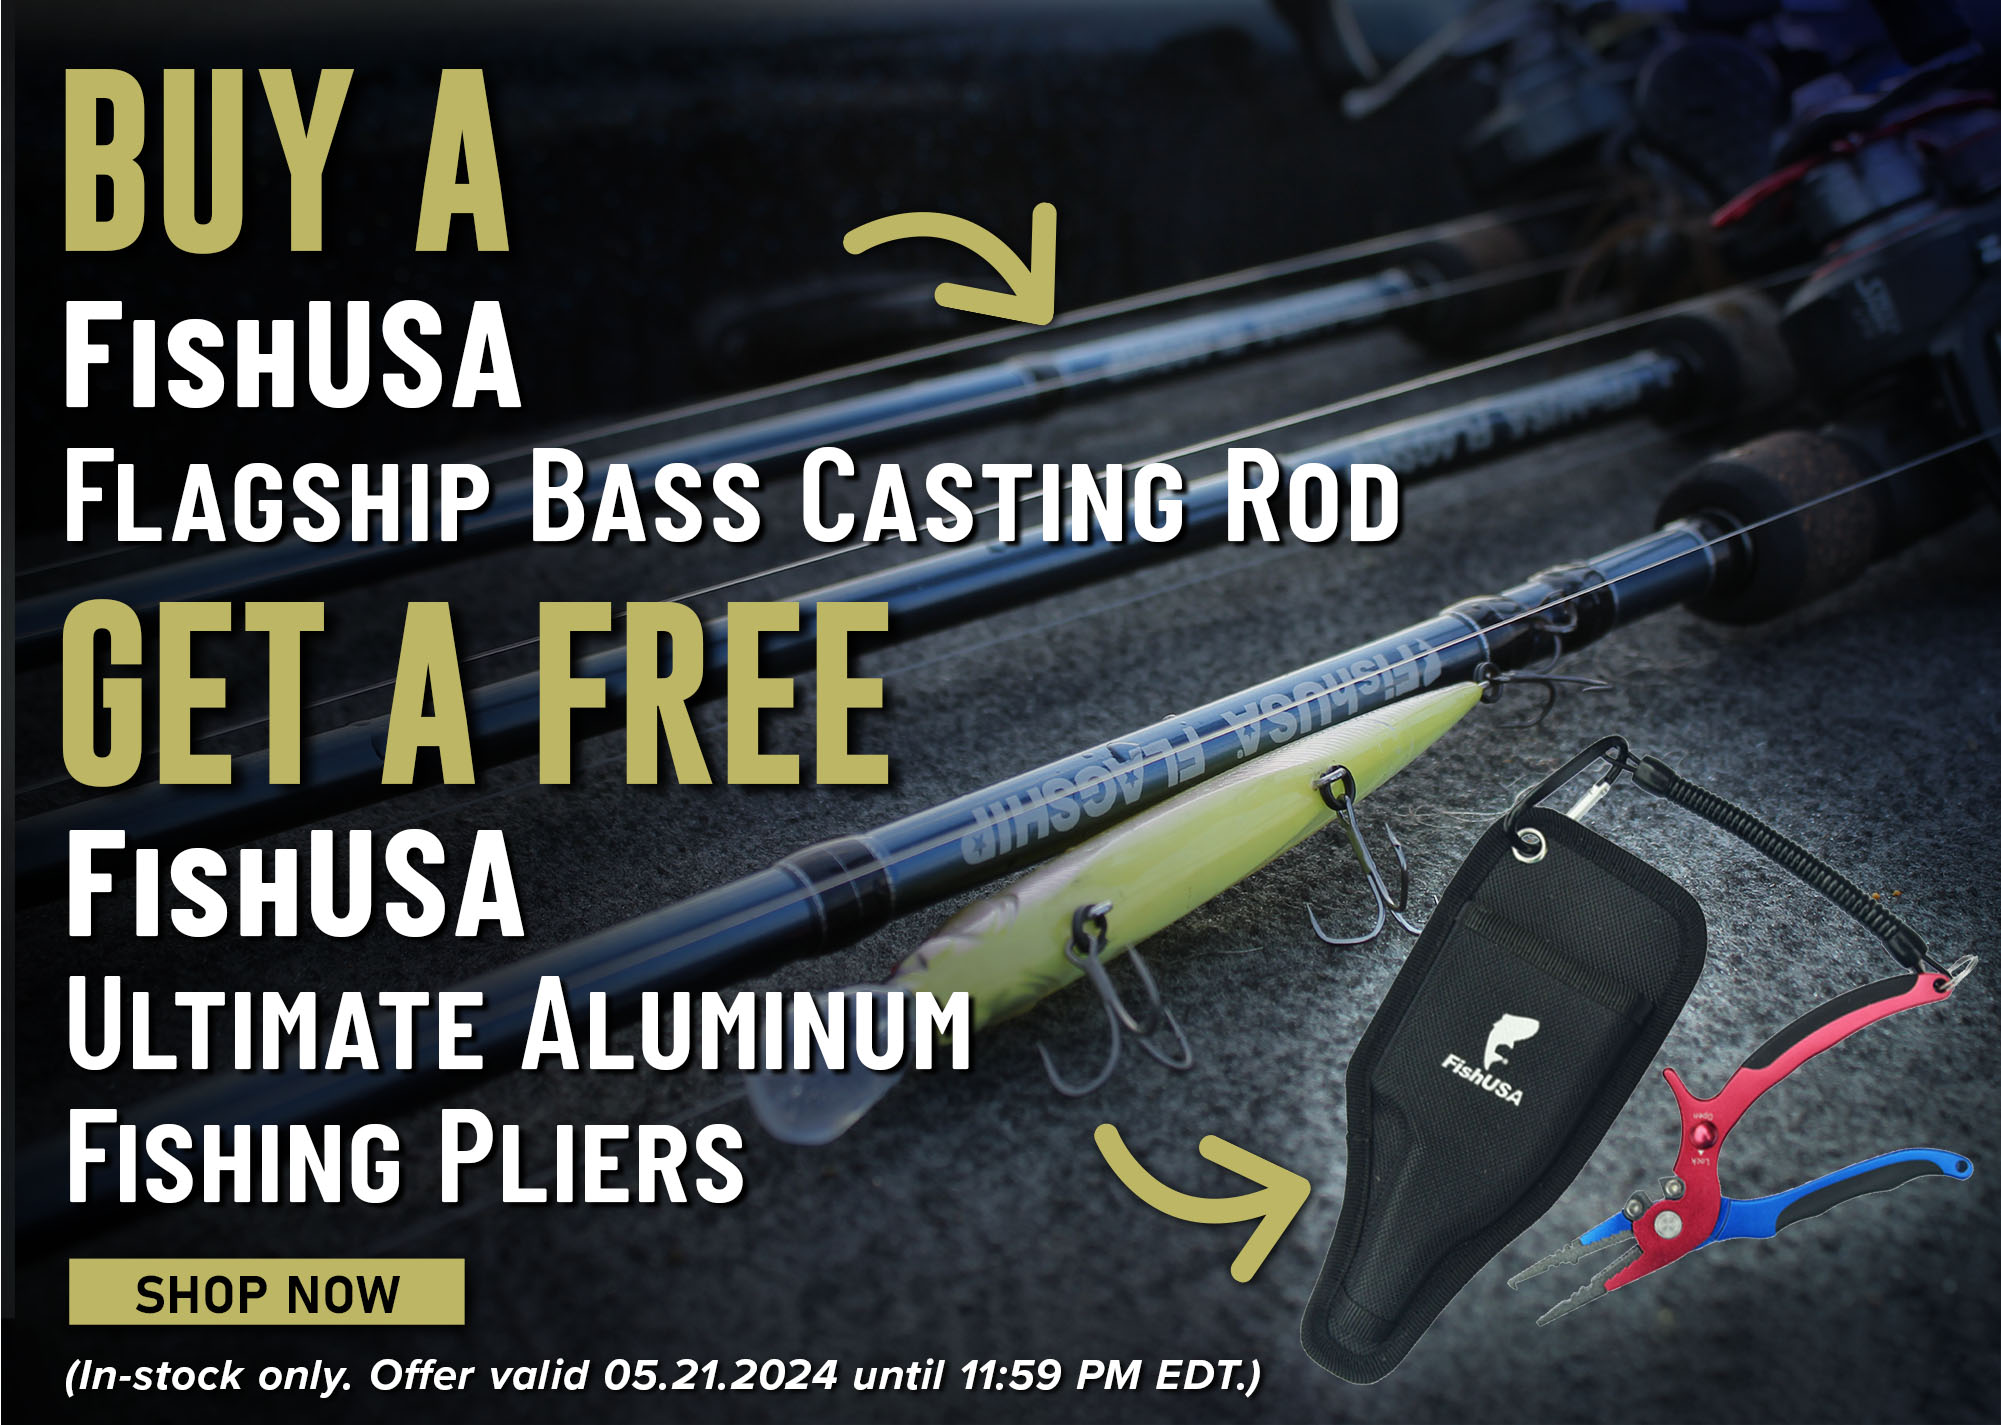 Buy a FishUSA Flagship Bass Casting Rod Get a Free FishUSA Ultimate Aluminum Fishing Pliers Shop Now (In-stock only. Offer valid 05.21.2024 until 11:59 PM EDT.)